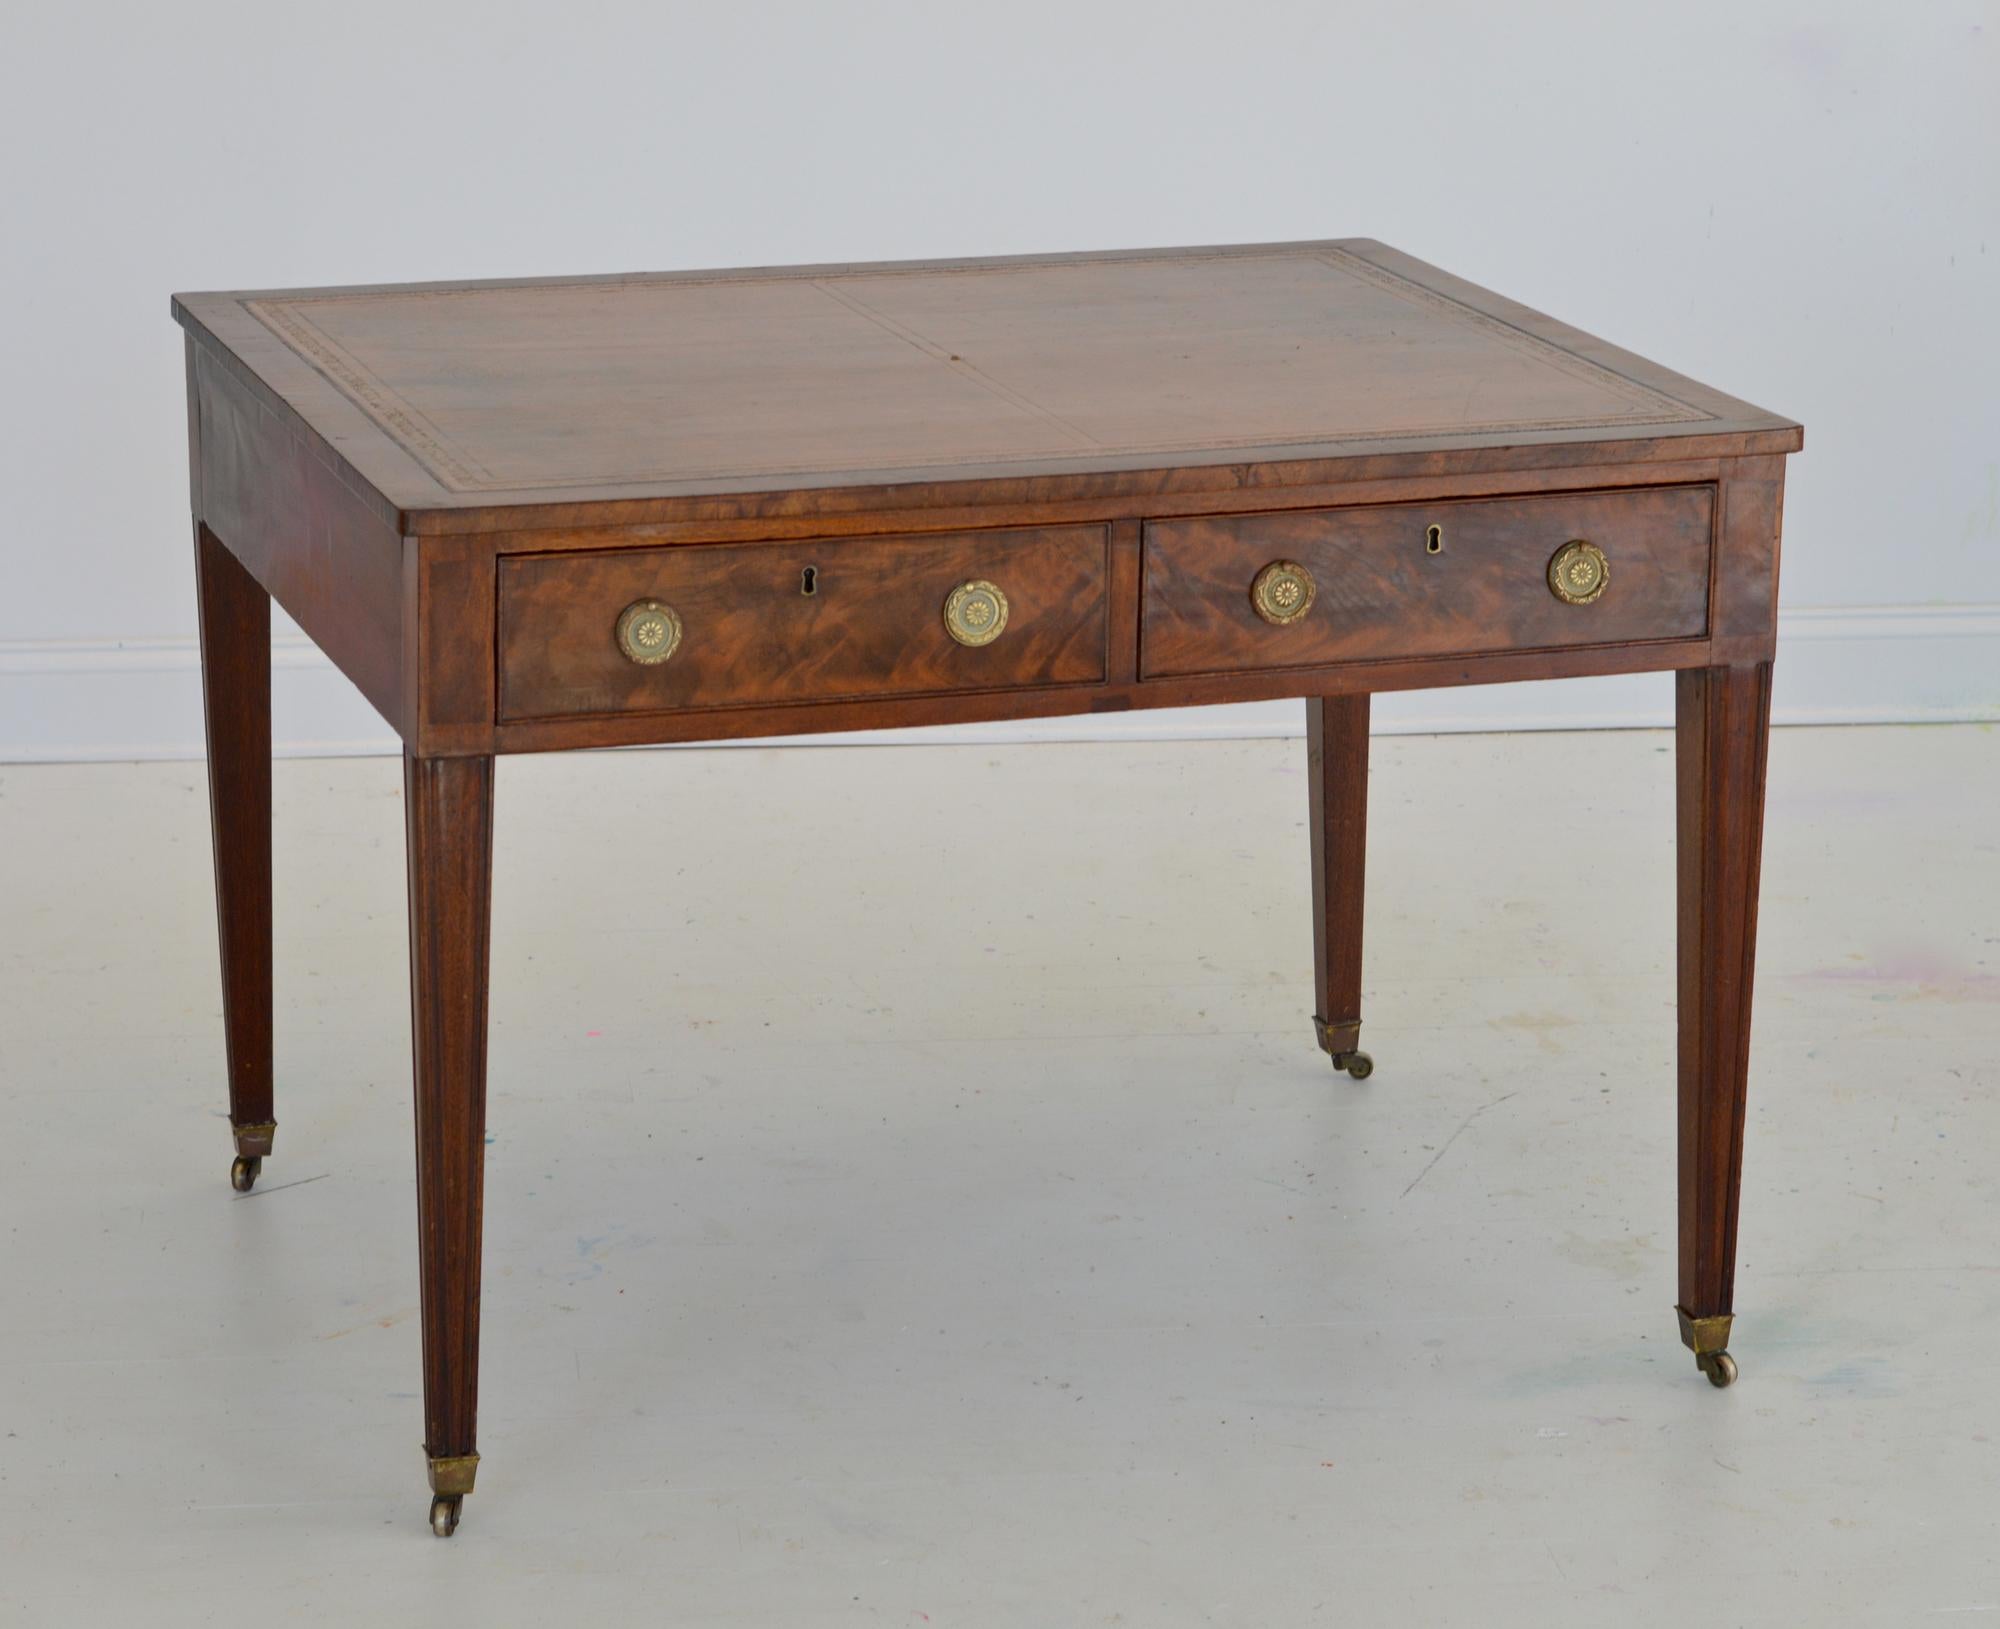 A stunning late 19th century Regency partners desk having an ample rectangular top adorned with gorgeous liver colored tooled leather. The surface is supple and rich. Each side of the writing table supplies the user with two useful and deep drawers.